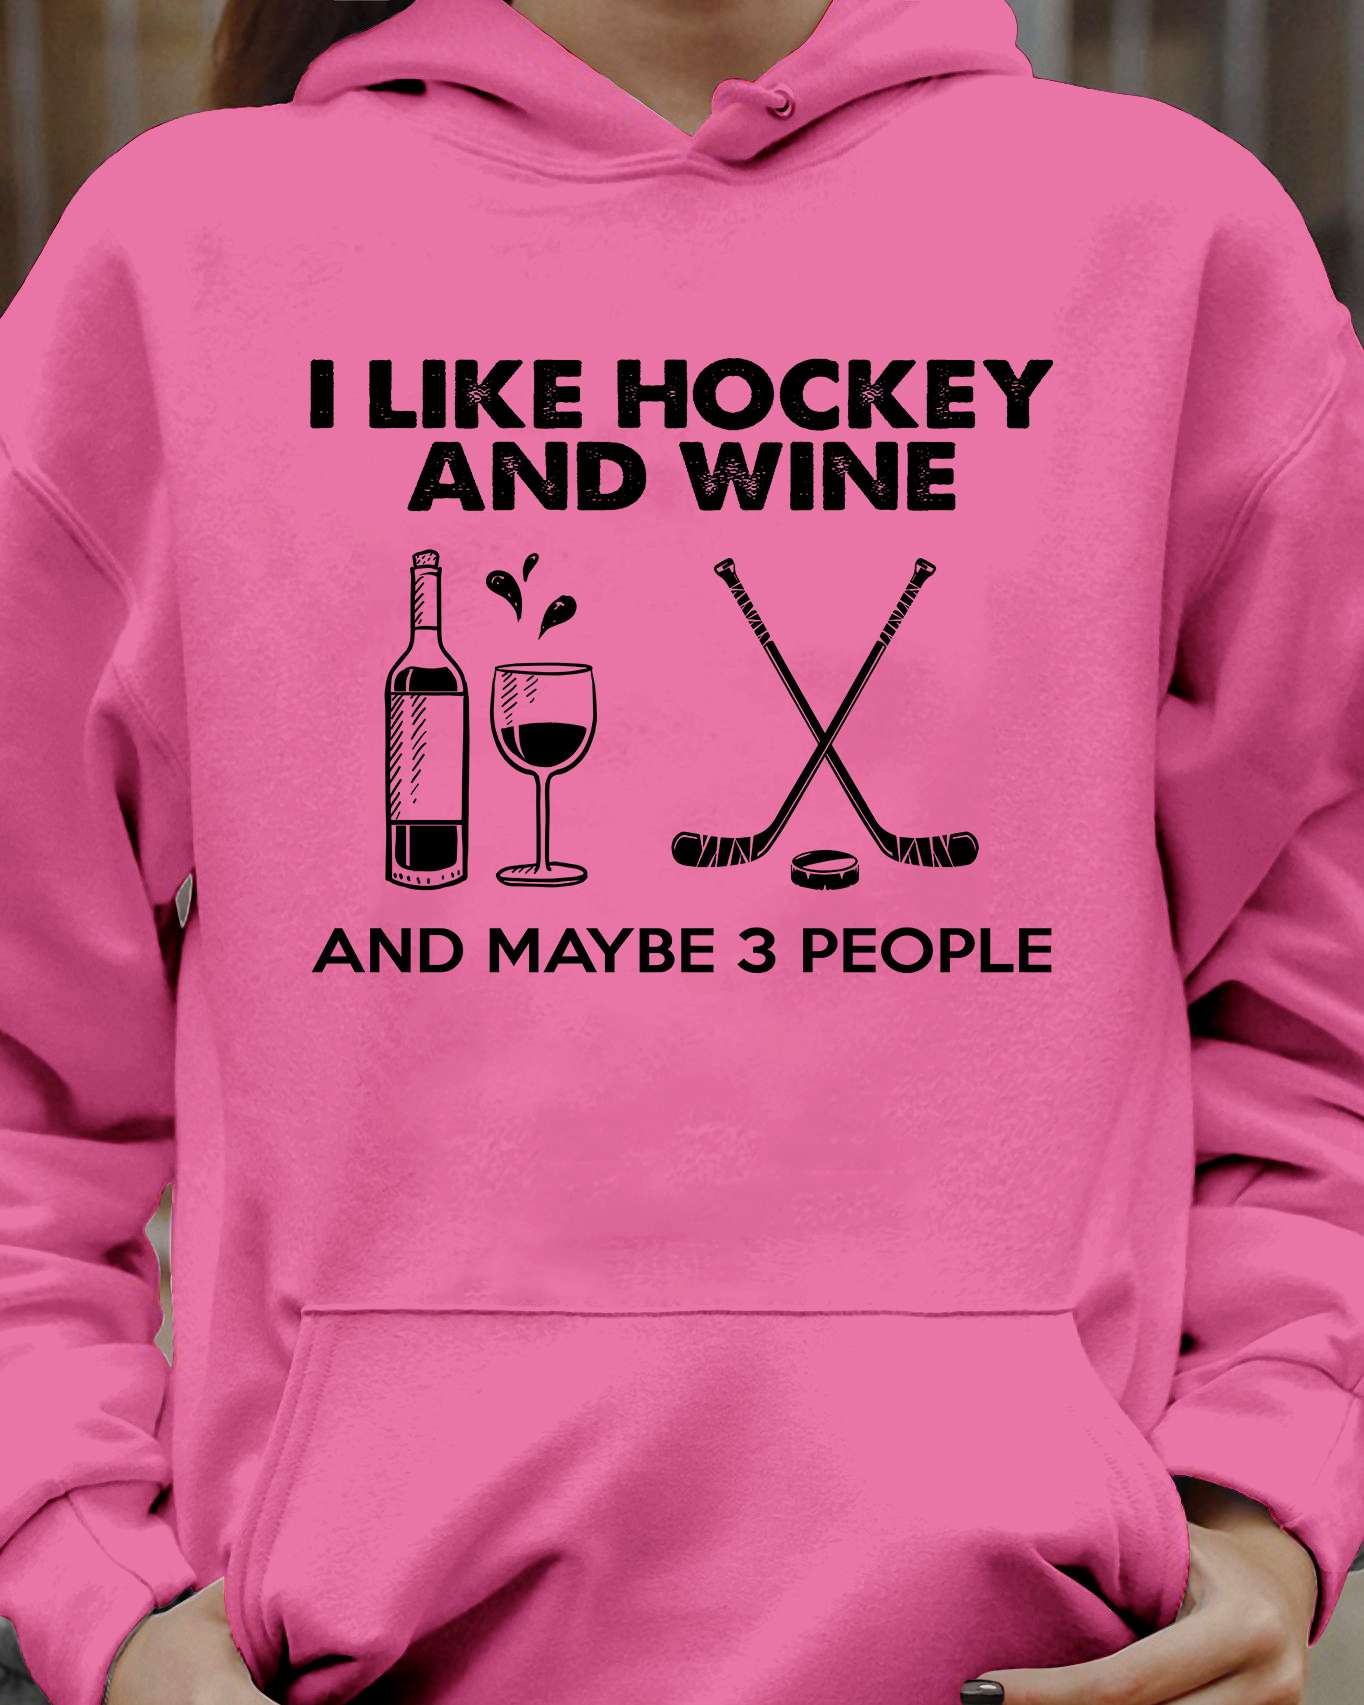 I like hockey and wine and maybe 3 people - Drinking wine and playing hockey